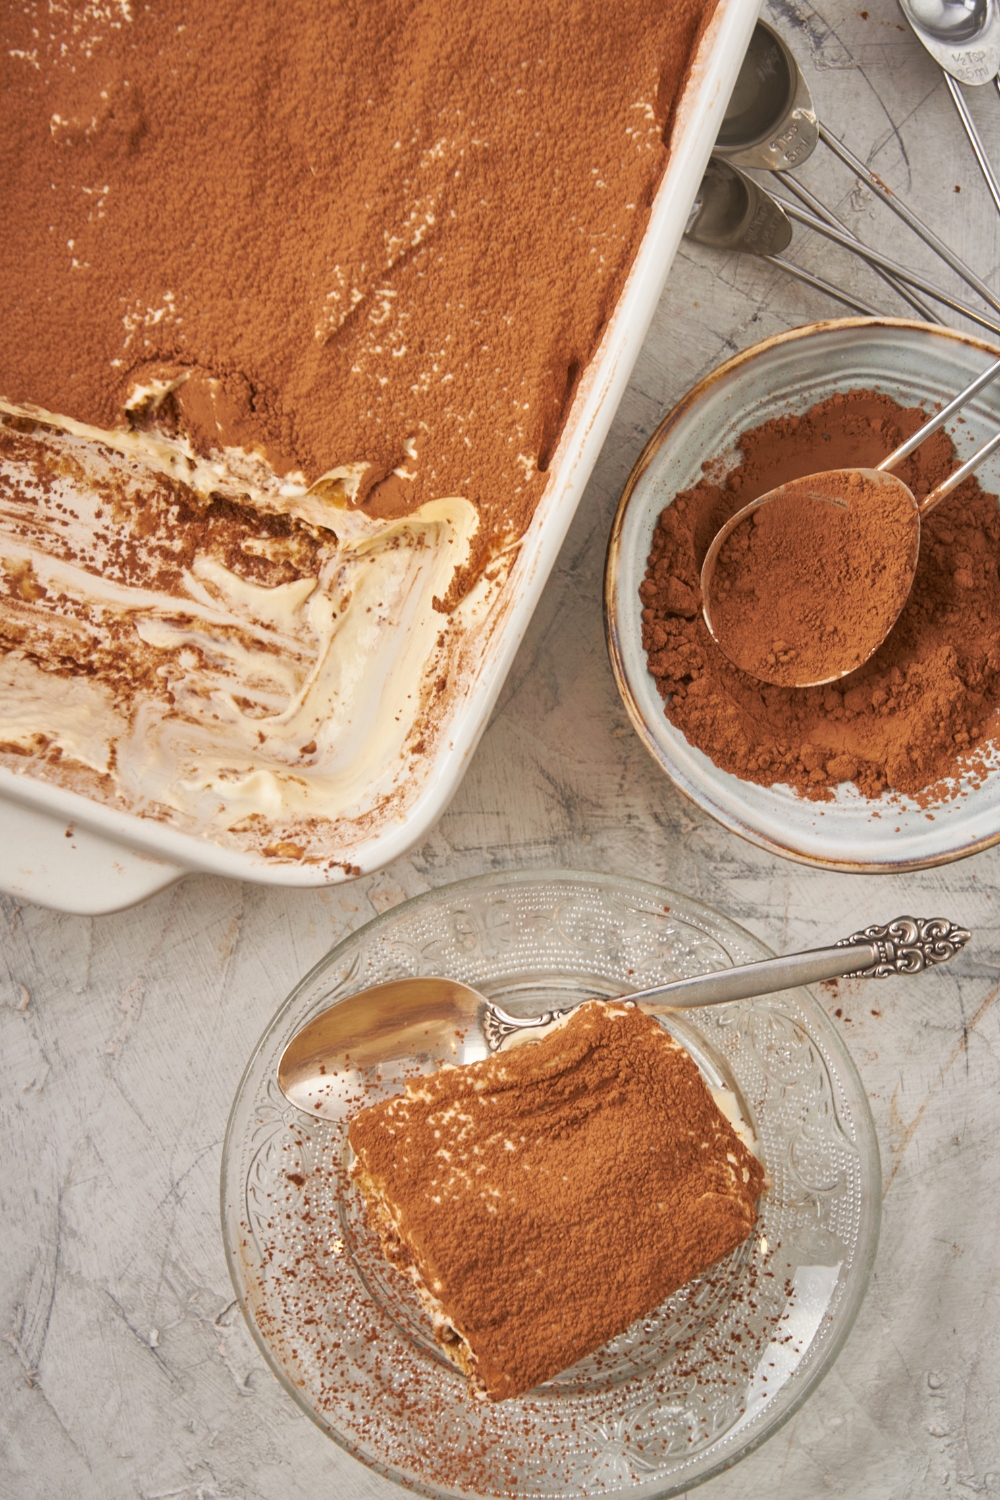 An overhead view of a slice of tiramisu on a plate. The remaining tiramisu is in the pan to the side of the plate.